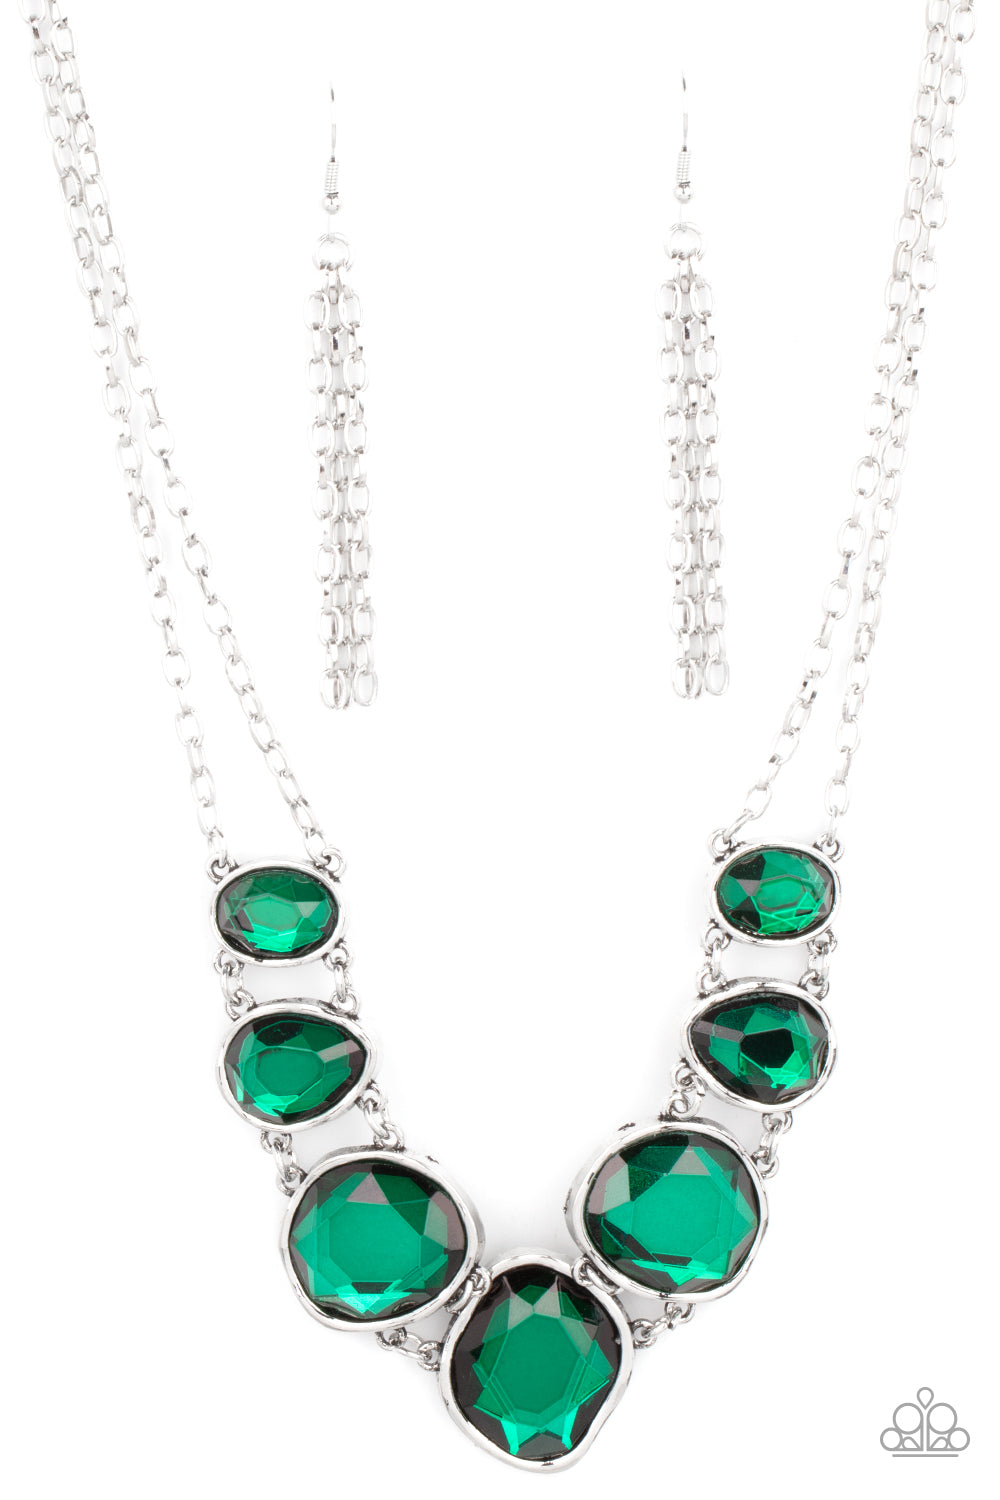 Absolute Admiration - Green necklace B061